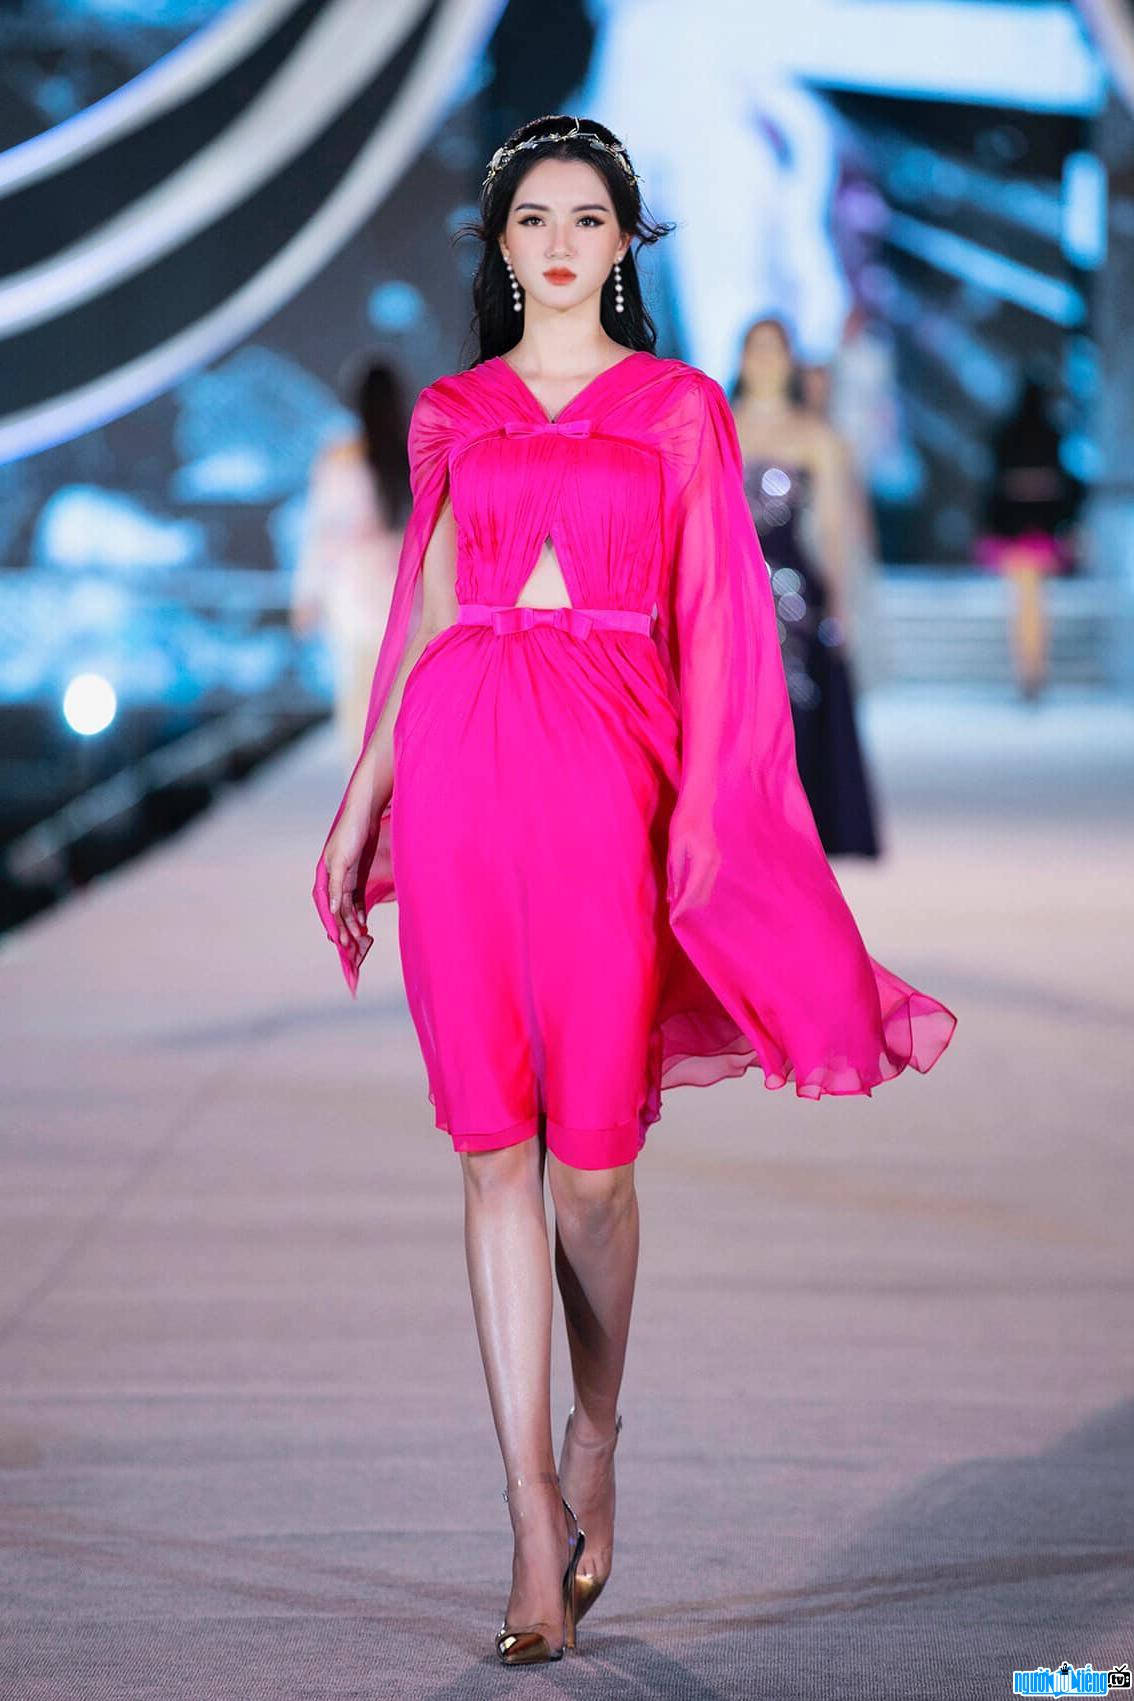  Image of Hoang Tu Quynh confidently on the catwalk